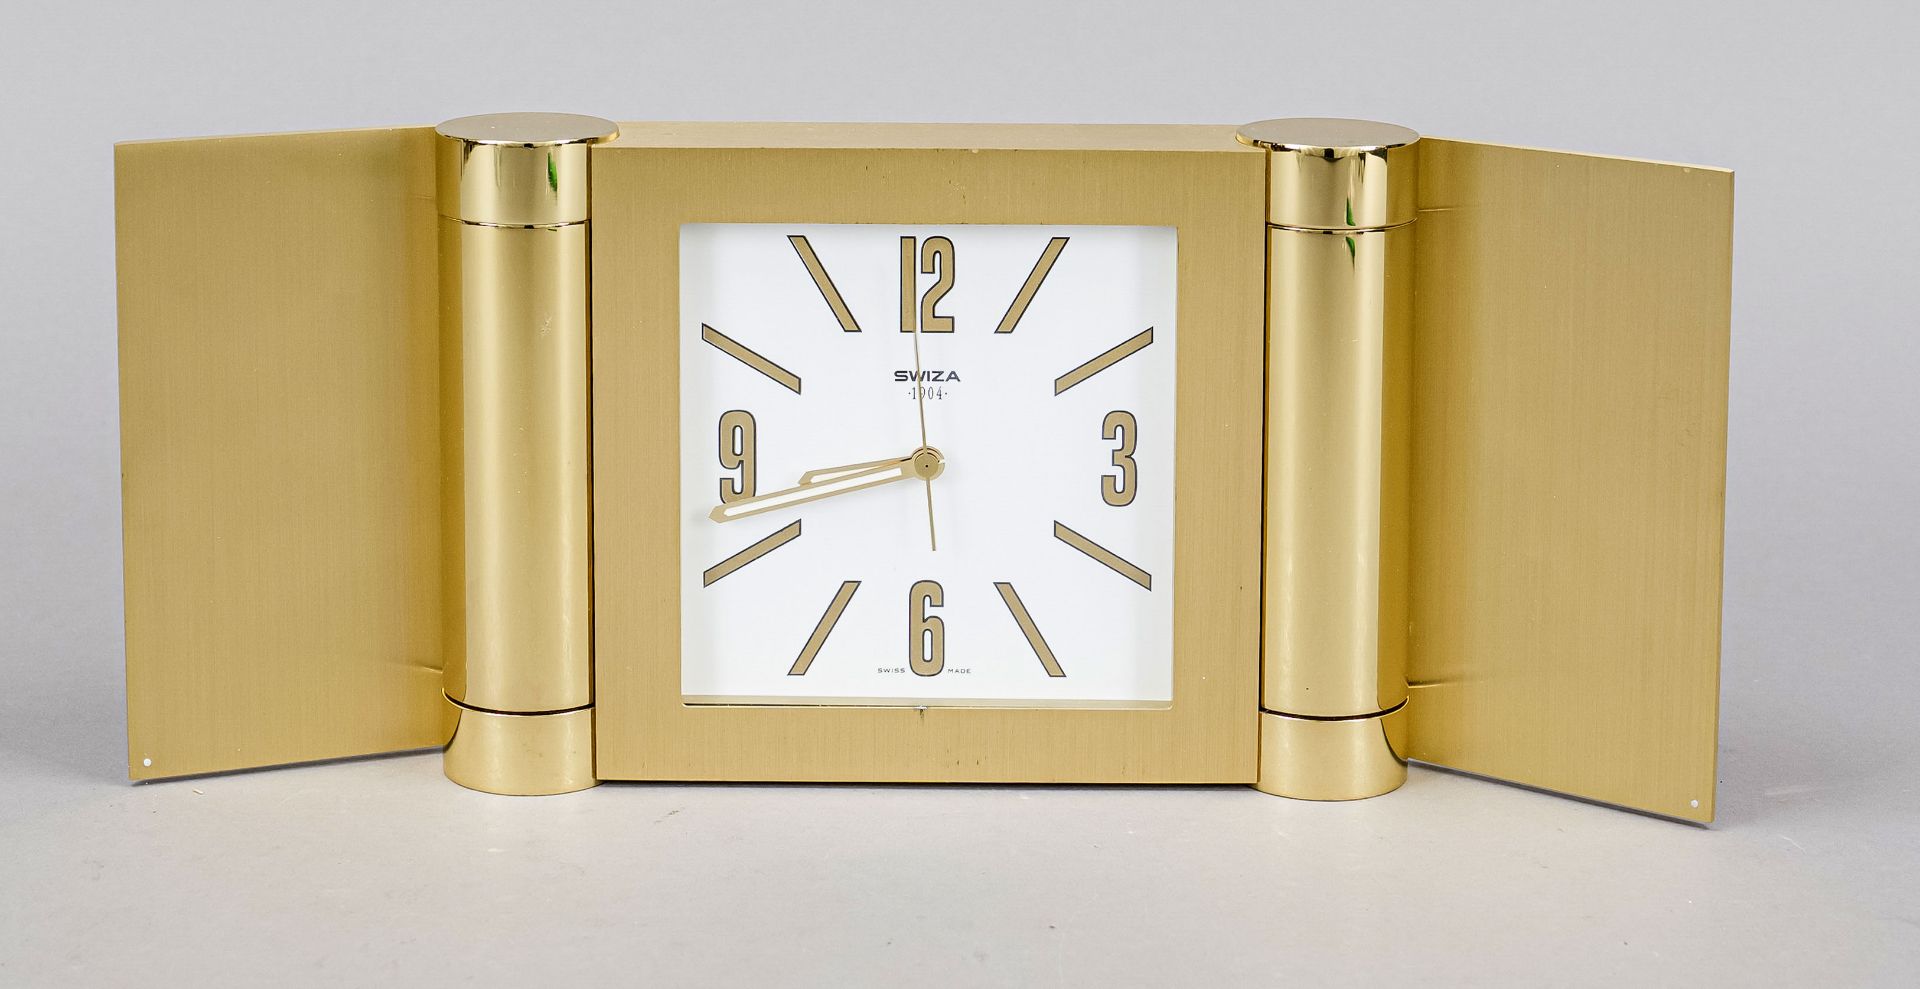 Swiza 1904, table clock, circa 1990, in the shape of a cabinet, solid brass, gilt, case with fine